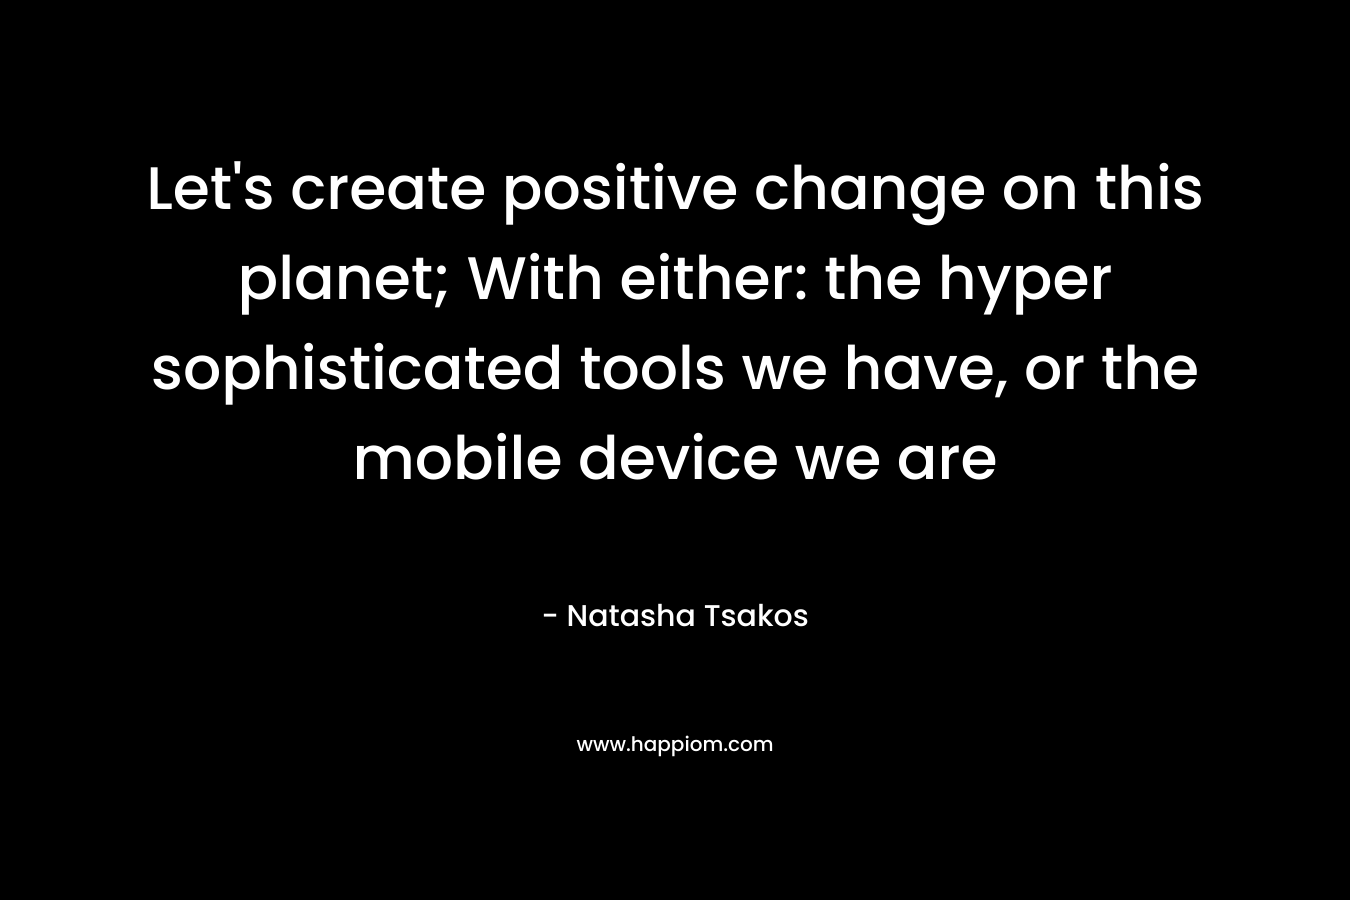 Let’s create positive change on this planet; With either: the hyper sophisticated tools we have, or the mobile device we are – Natasha Tsakos